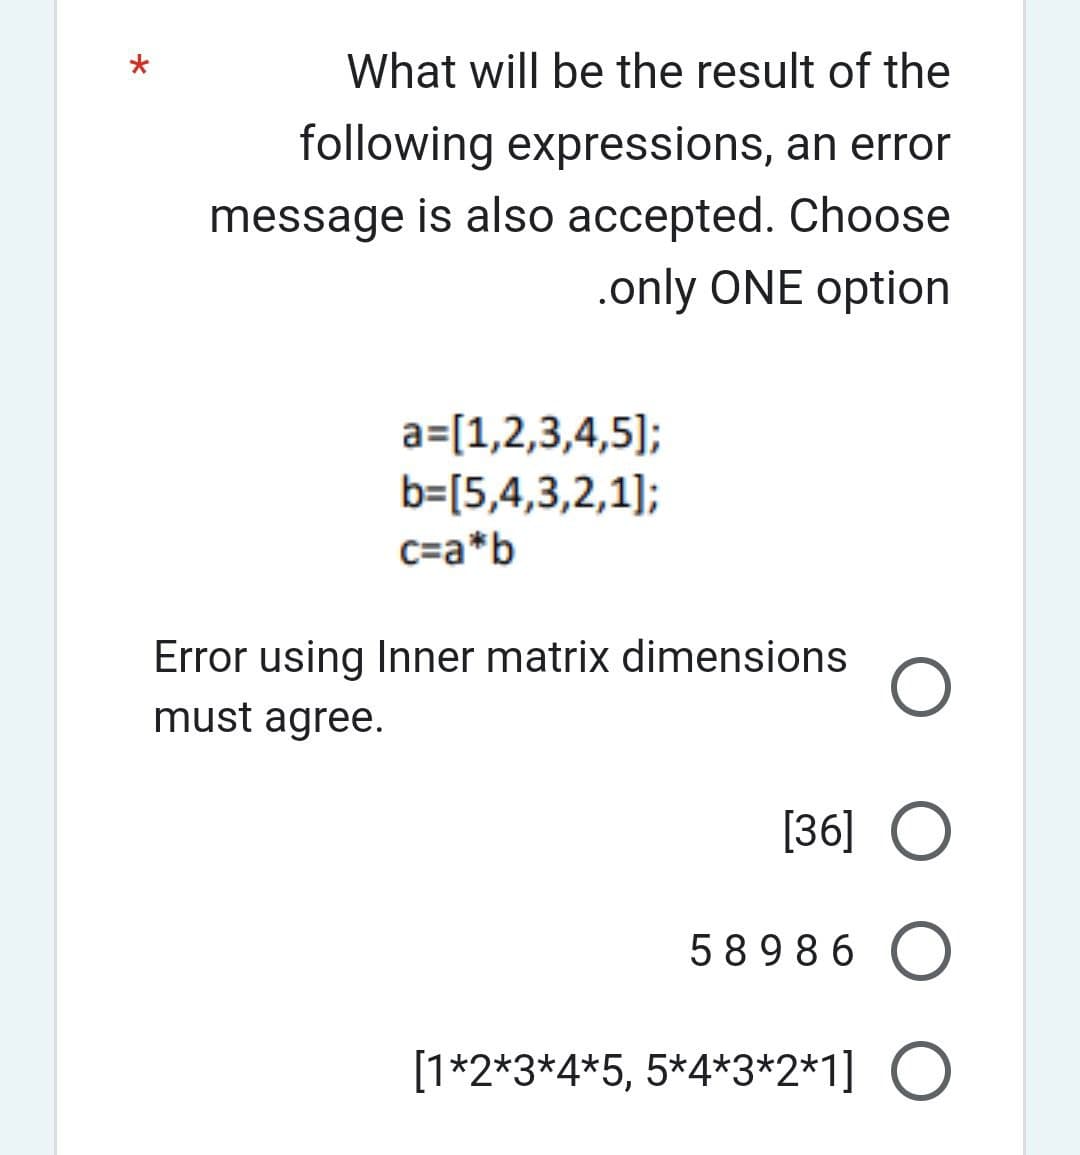 What will be the result of the
following expressions, an error
message is also accepted. Choose
.only ONE option
a=[1,2,3,4,5];
b=[5,4,3,2,1];
c=a*b
Error using Inner matrix dimensions
must agree.
O
[36] O
58986 O
[1*2*3*4*5, 5*4*3*2*1] O